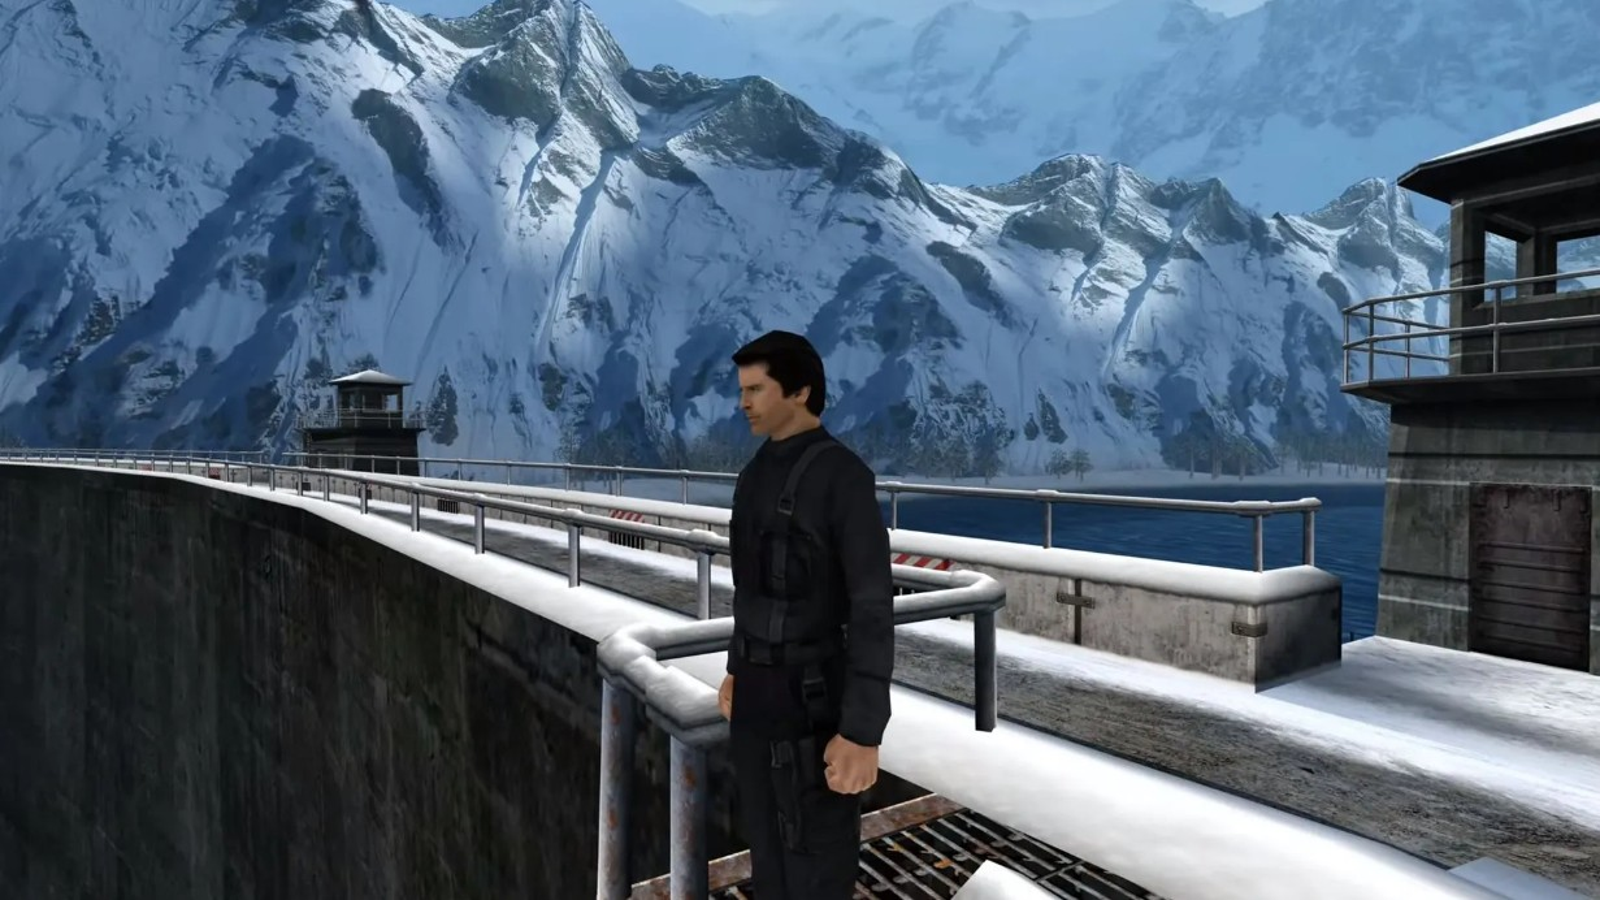 An Unofficial GoldenEye 007 Remake Is Coming to the PC